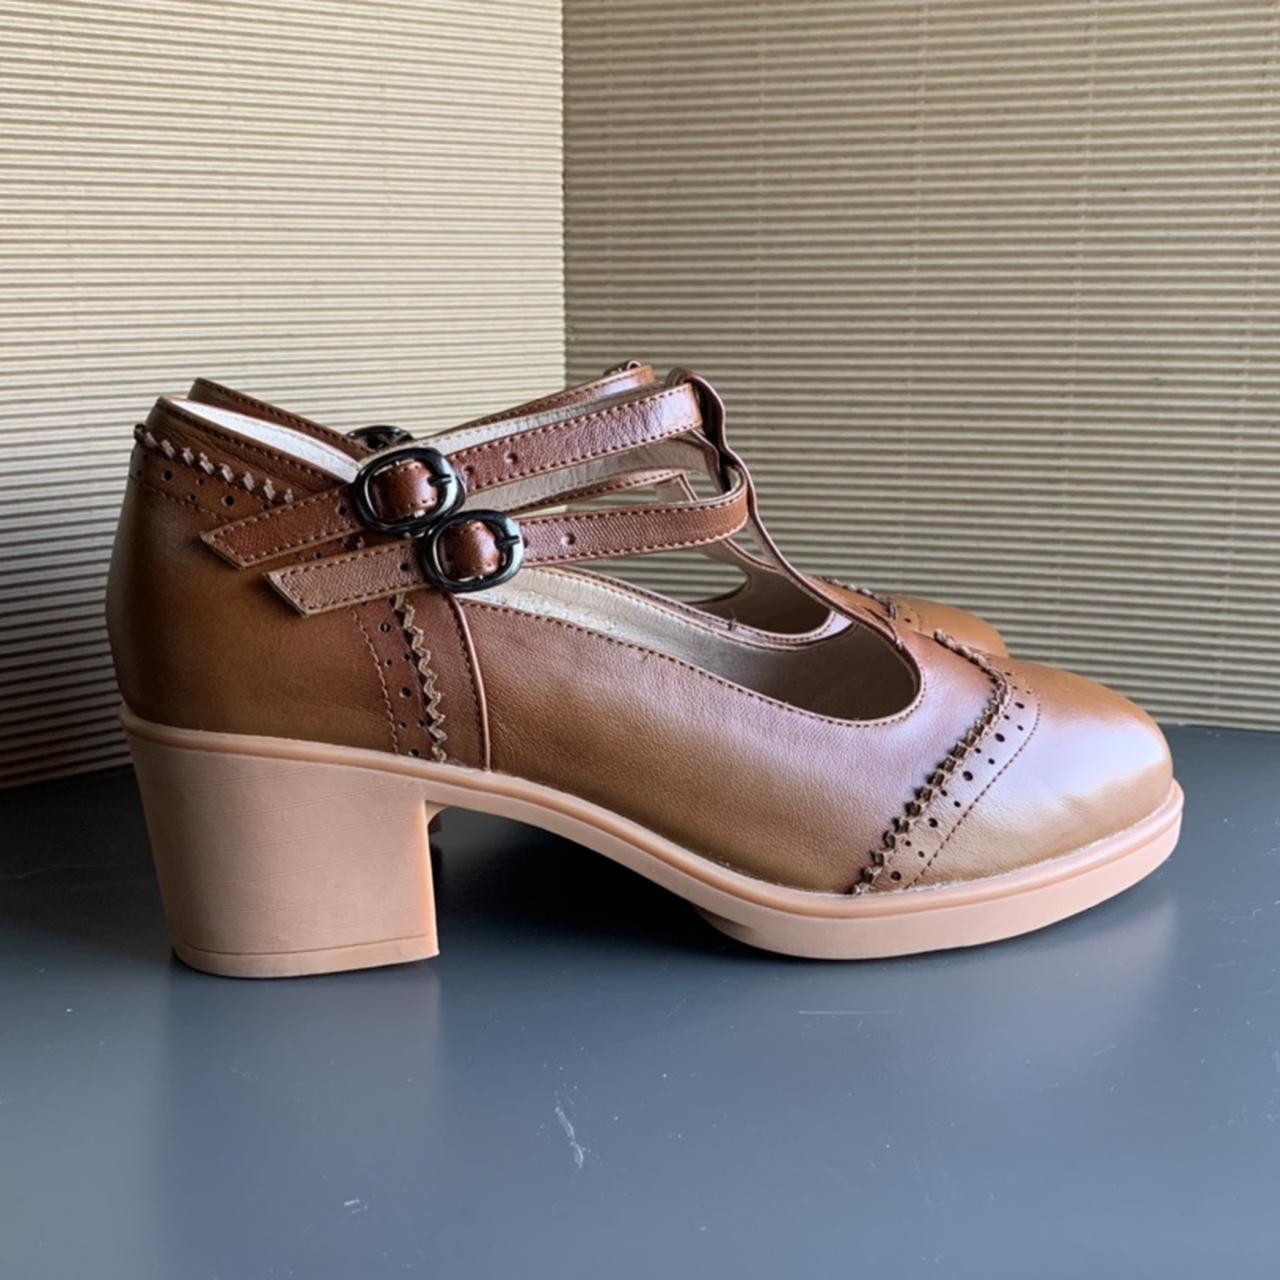 brown t-strap vintage-esque shoes by ecosusi! theyre